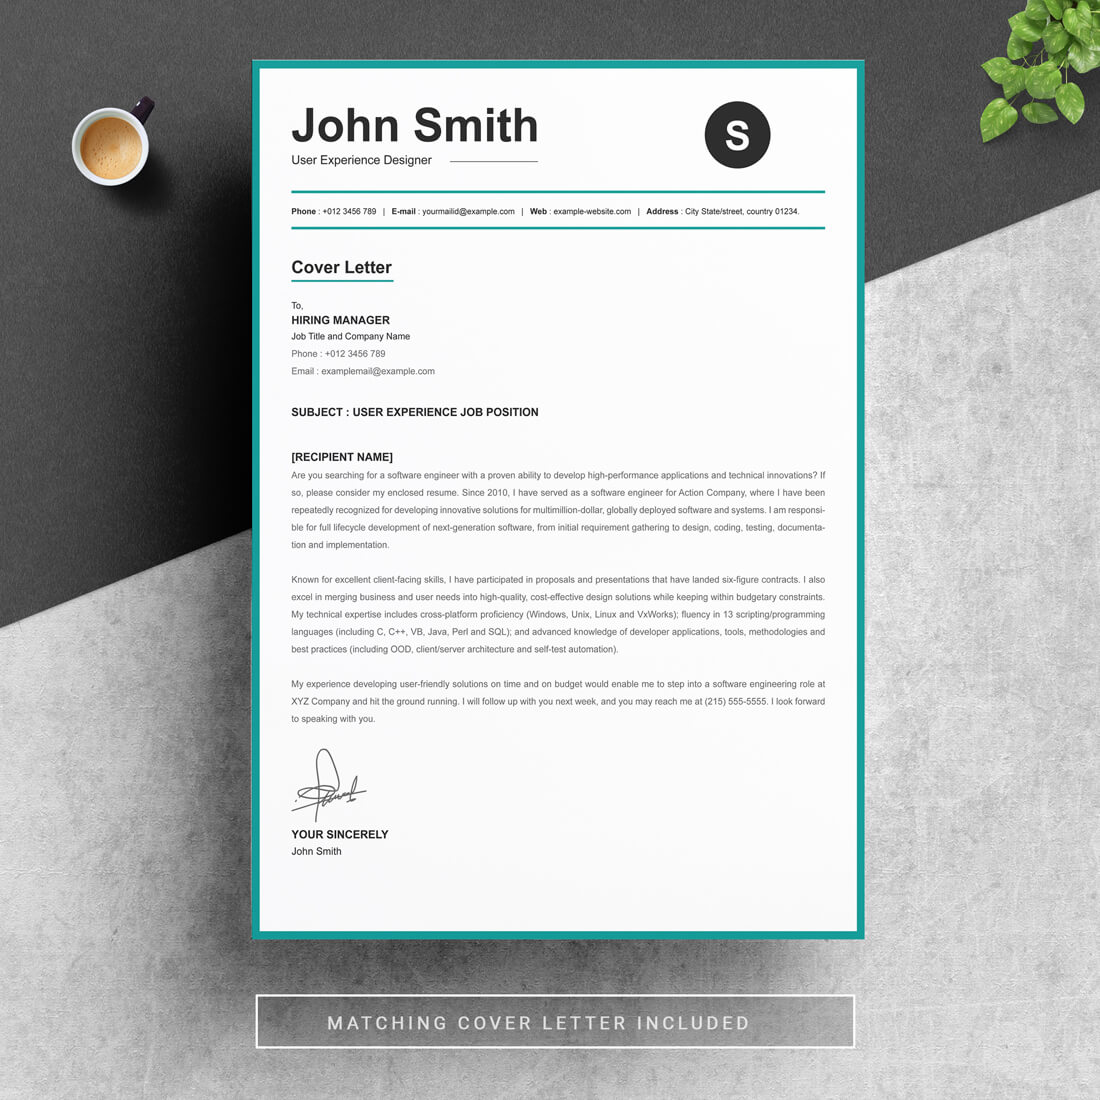 Title page of the Simple Resume Template Design.